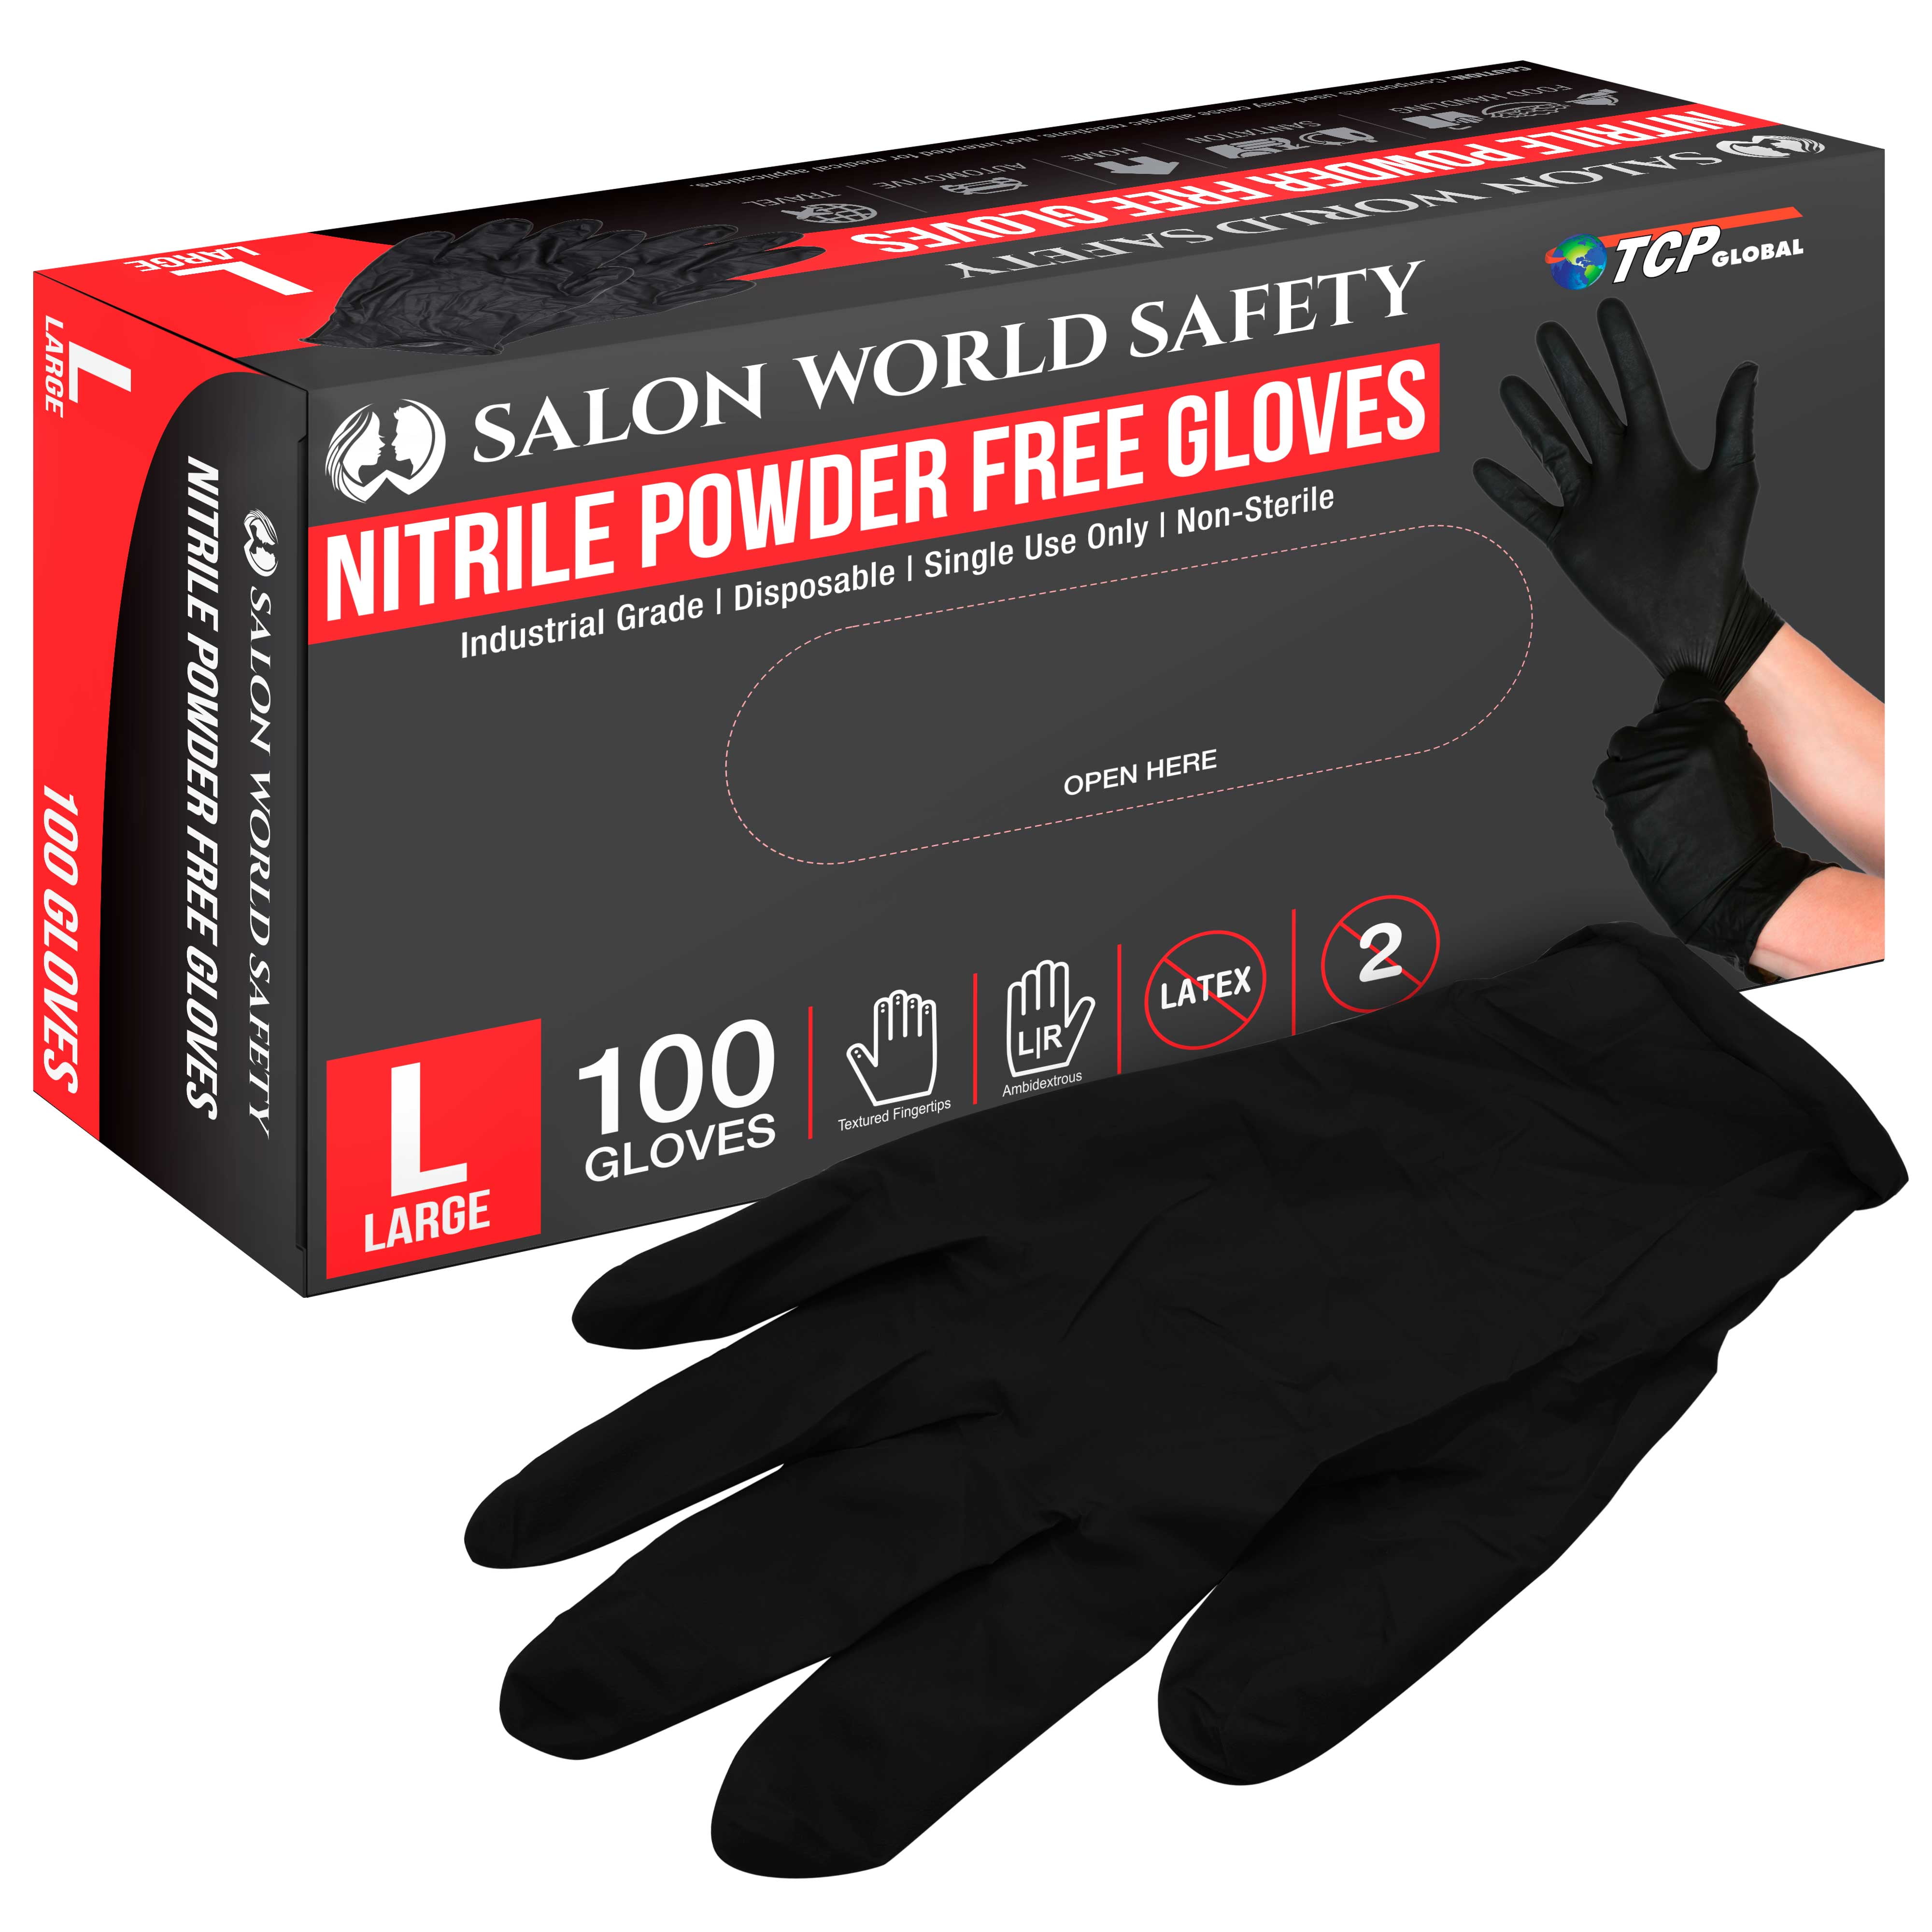 Protective Nitrile Glove 6 Pairs Size L Black Color Comfort Durable All Purposes 